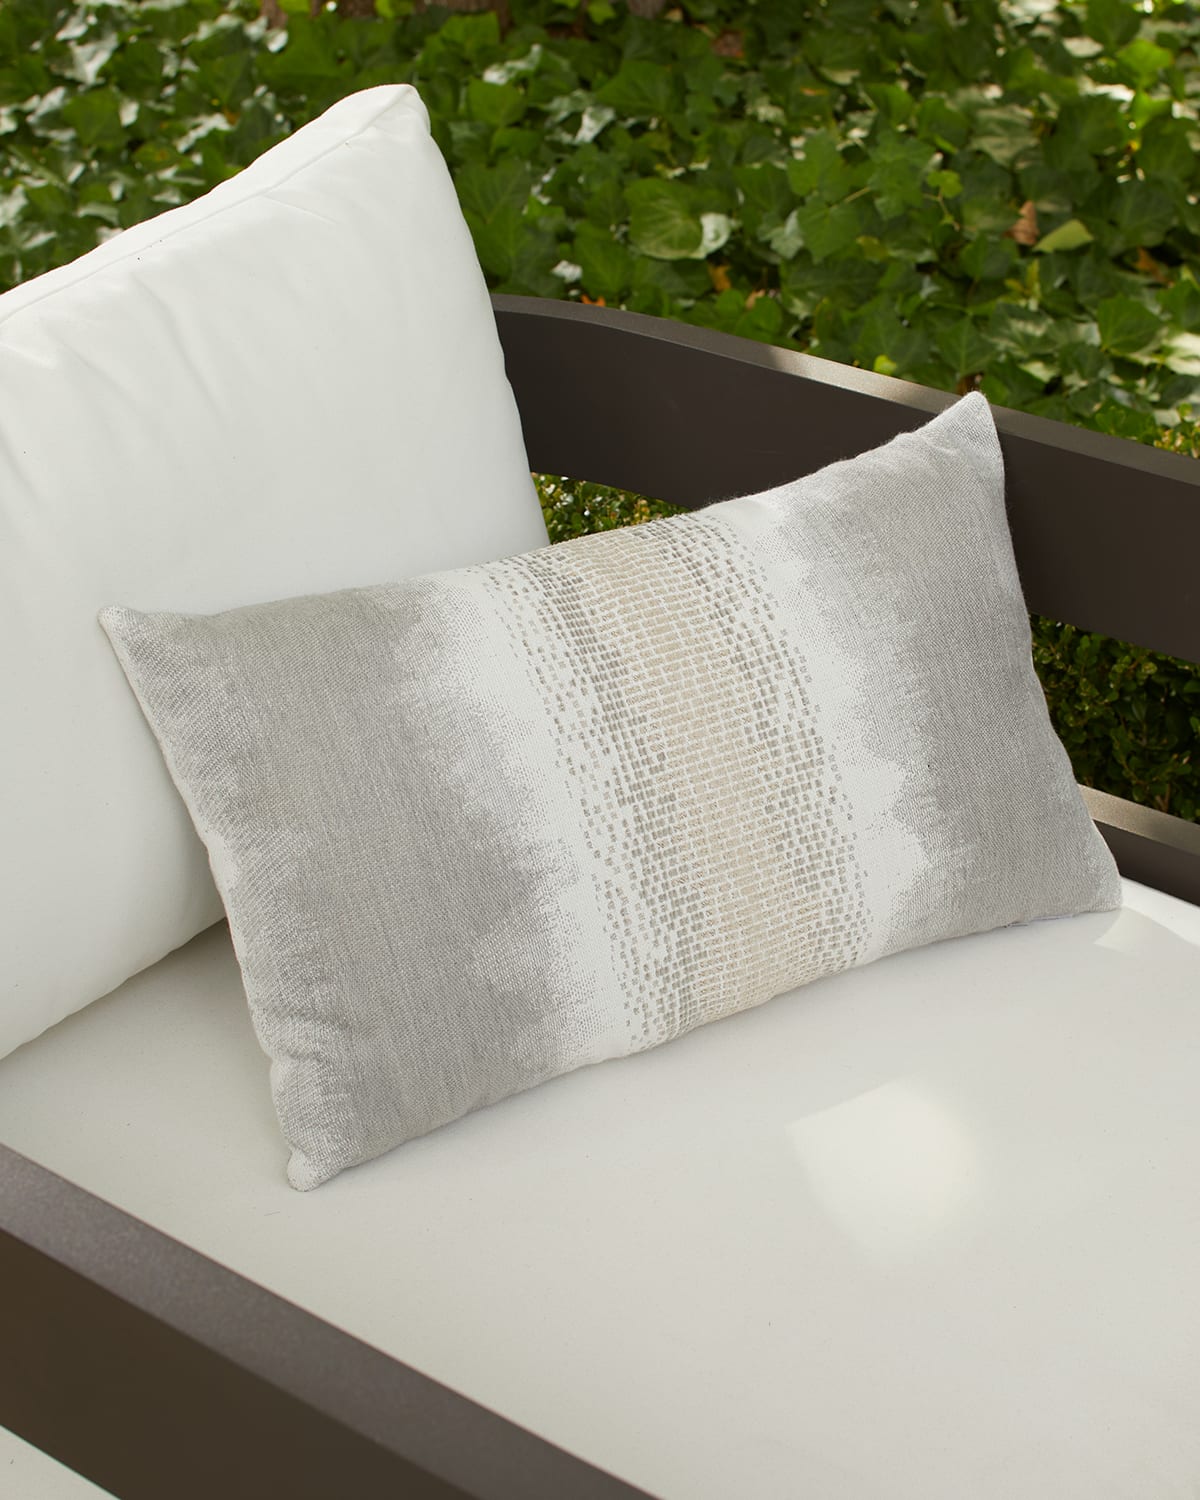 Elaine Smith Resilience Indoor/outdoor Pillow, 12" X 20"